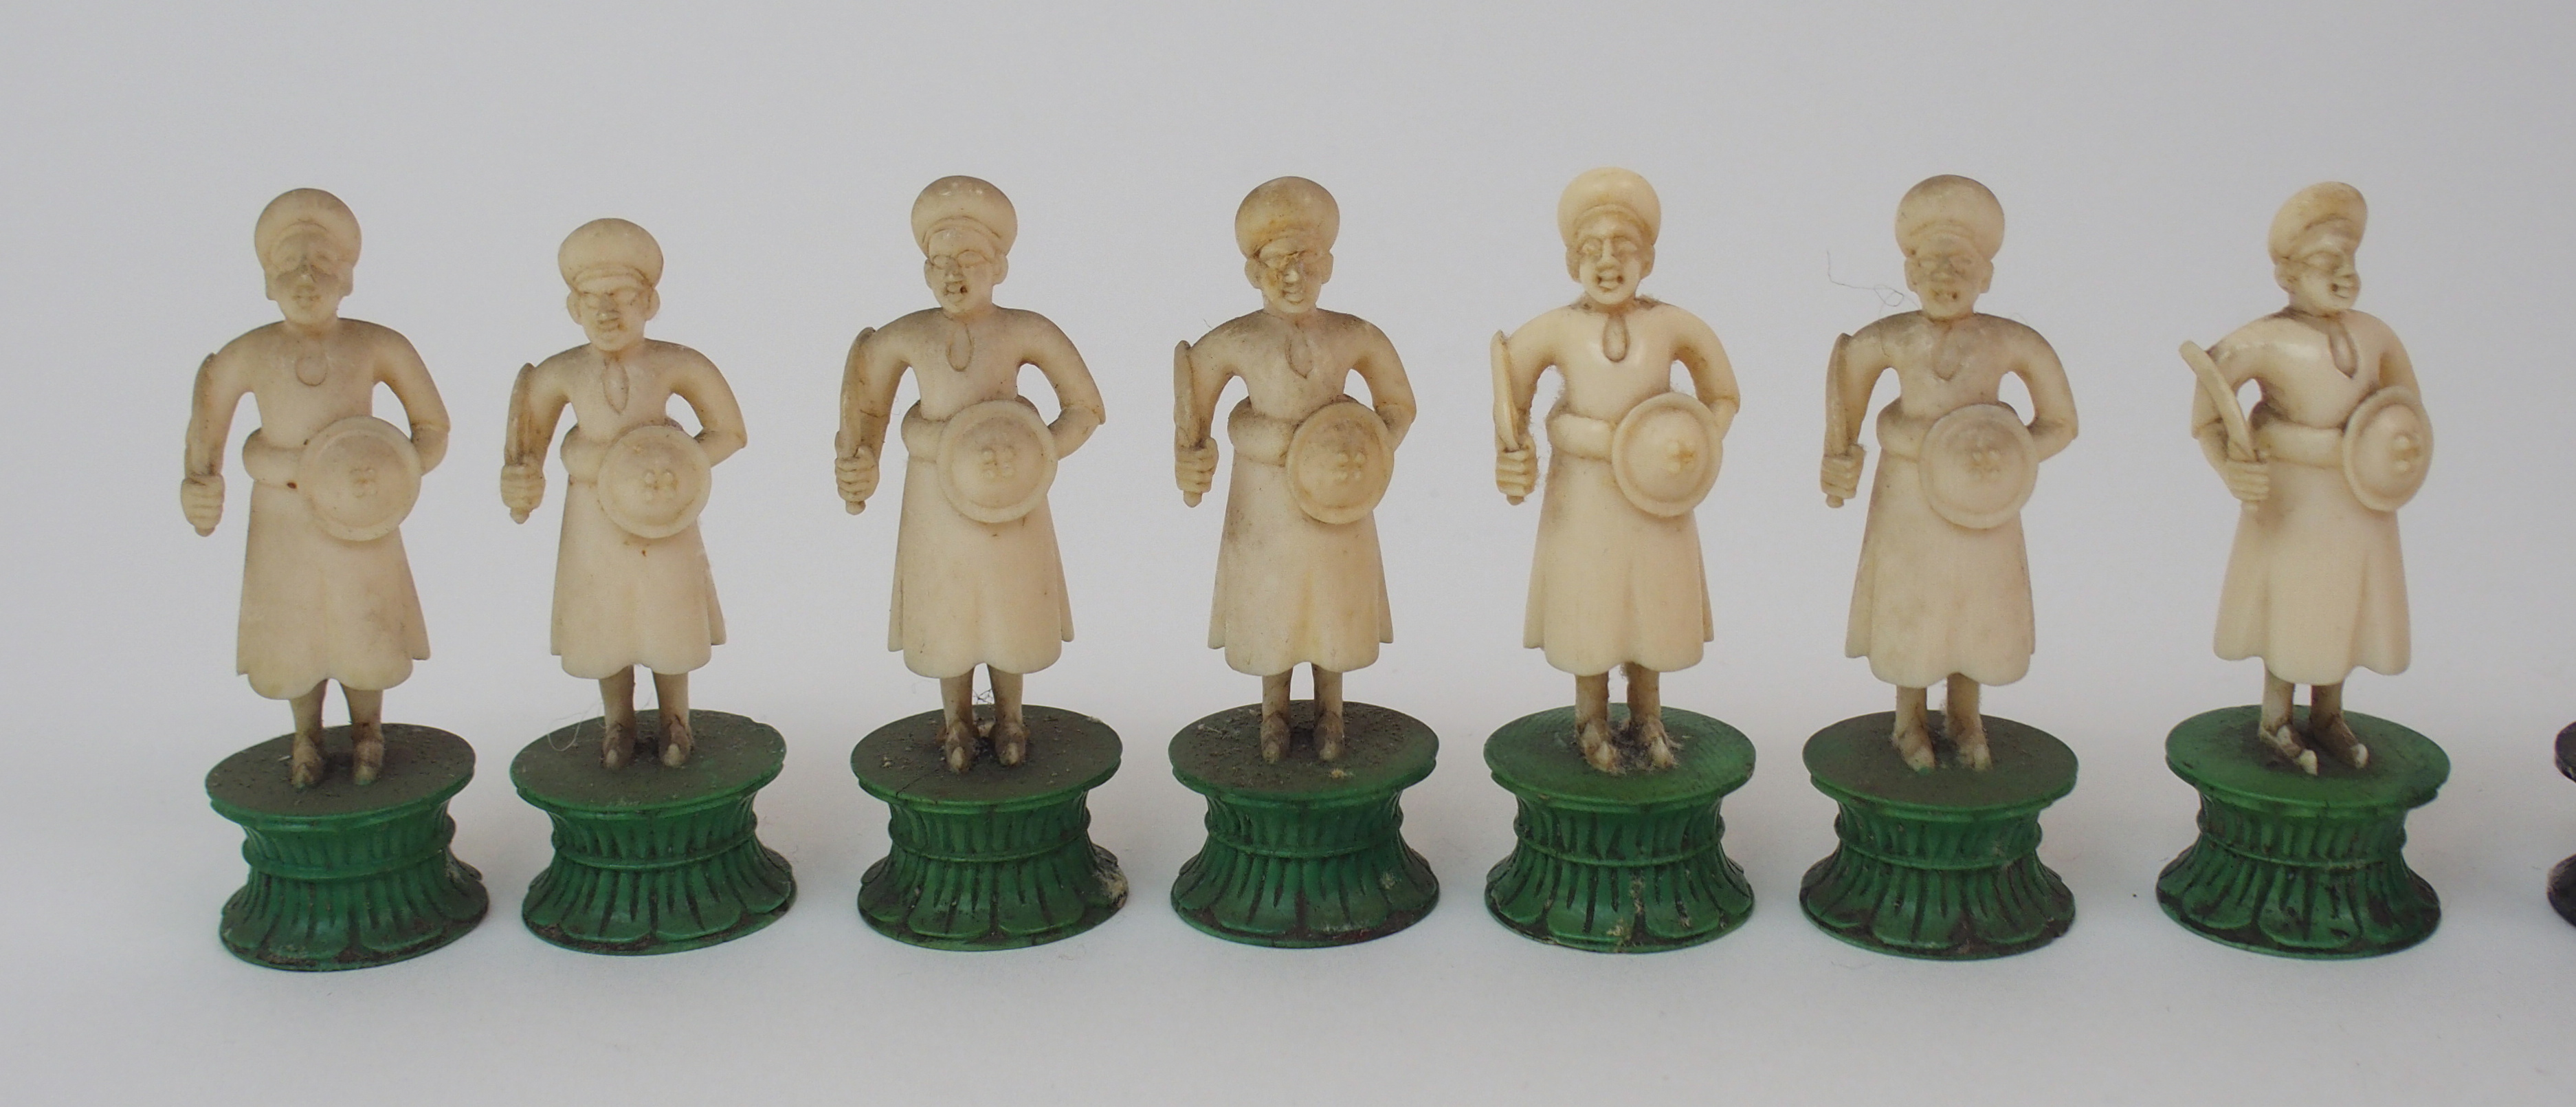 AN EAST INDIAN IVORY CHESS SET probably Berhampore, one set with black stained bases lacking two - Image 2 of 28